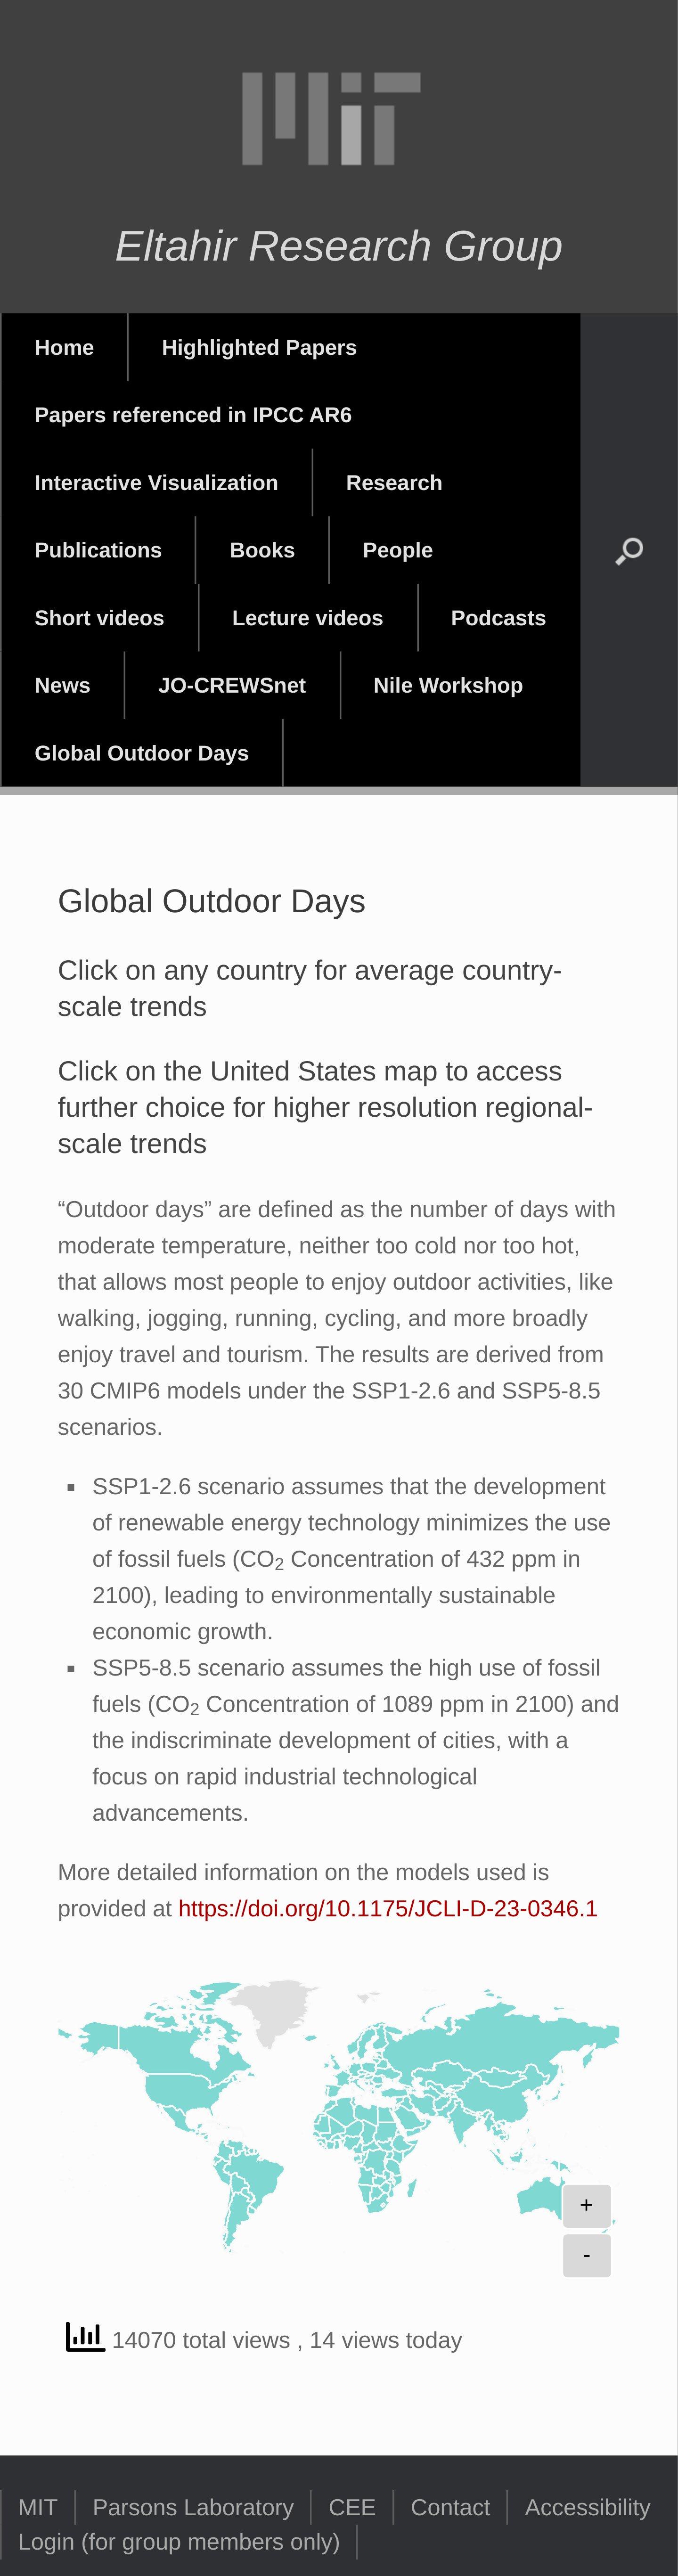 Global Outdoor Days Map – Now vs. 2100